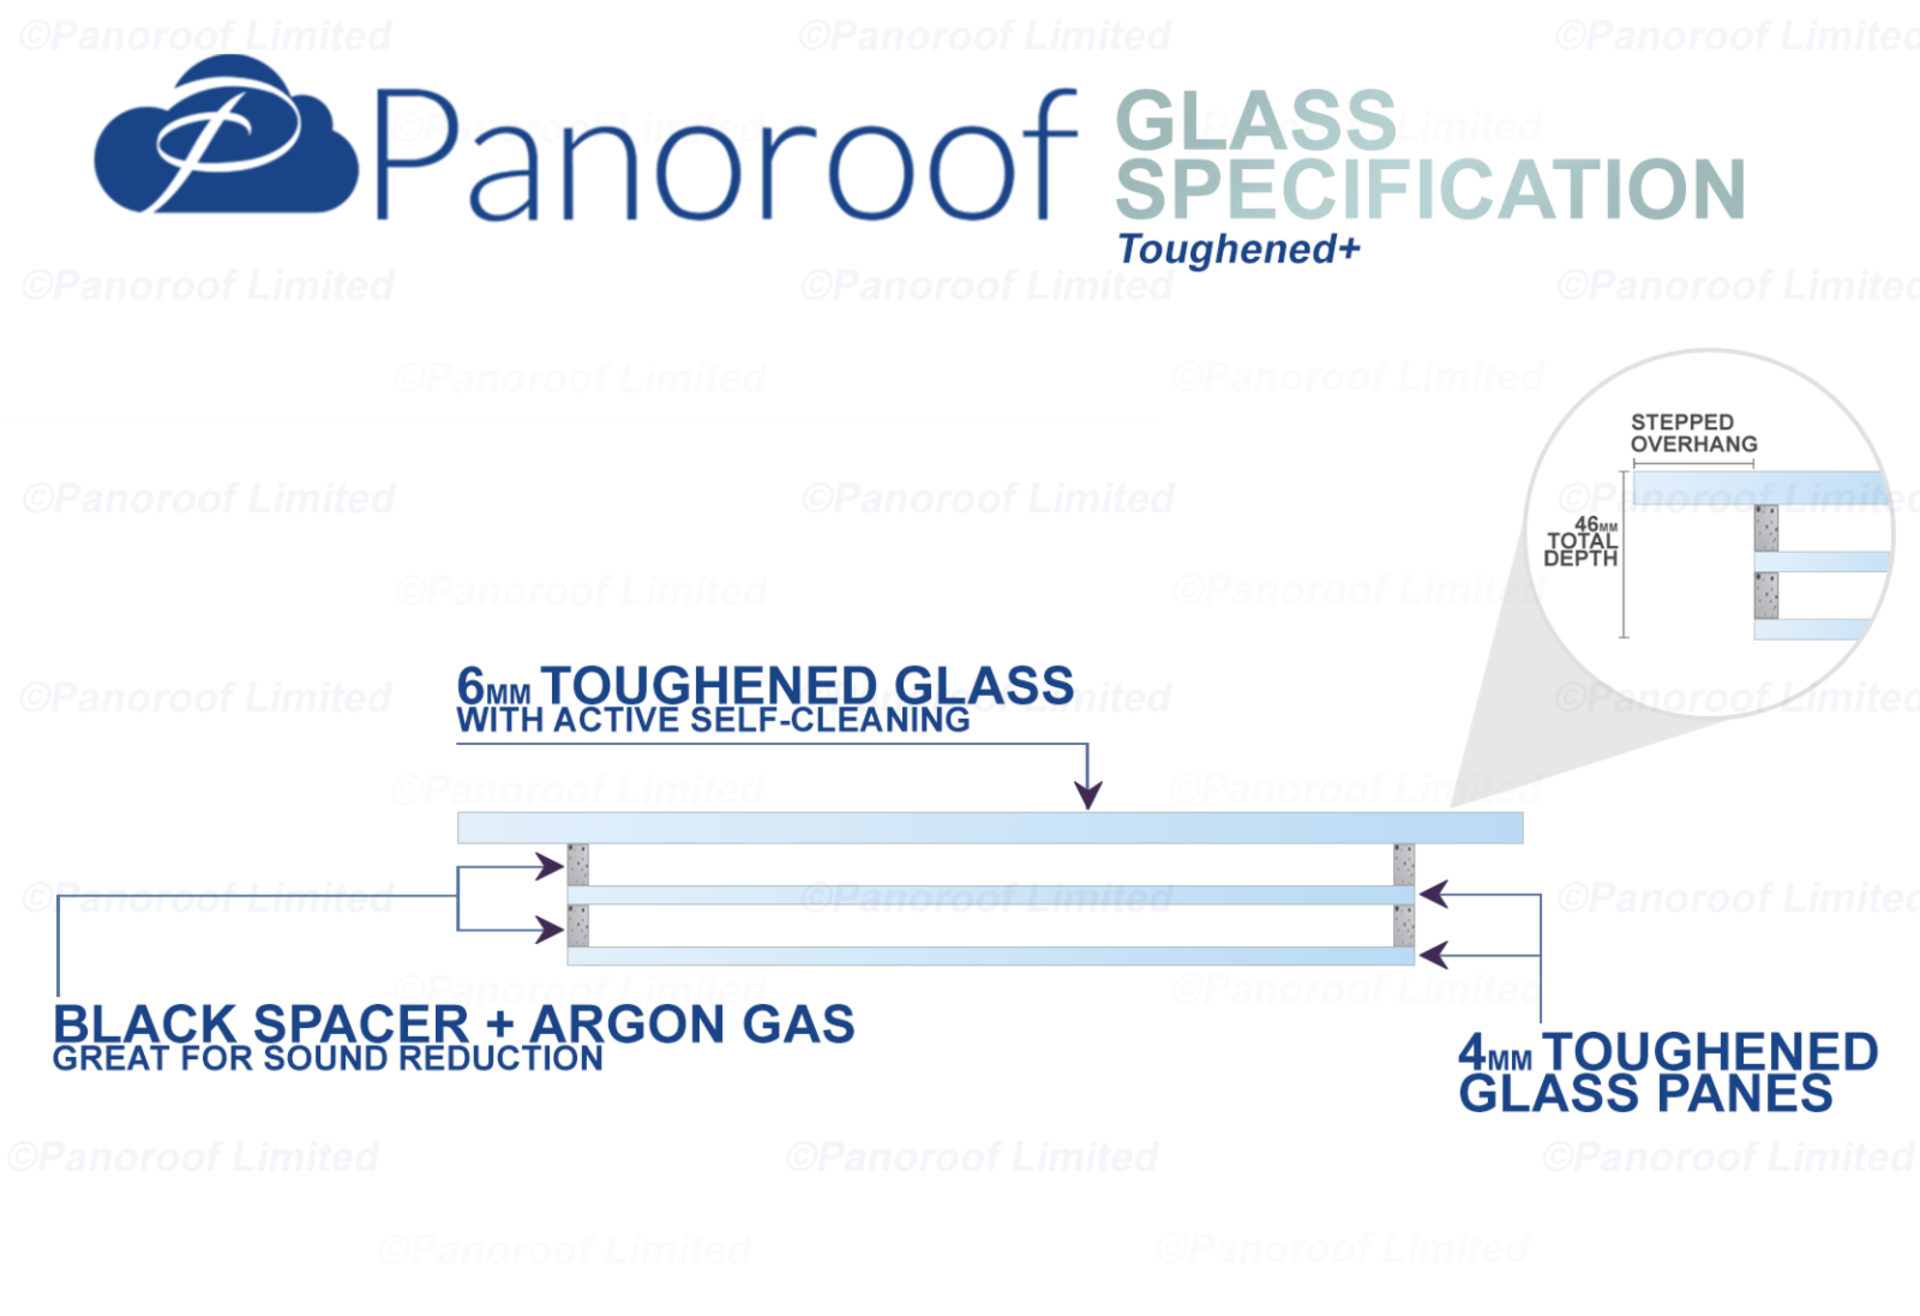 """Panoroof Triple Glazed Self Cleaning 800x1200mm (inside Size Visable glass area) Seamless Glass - Image 5 of 6